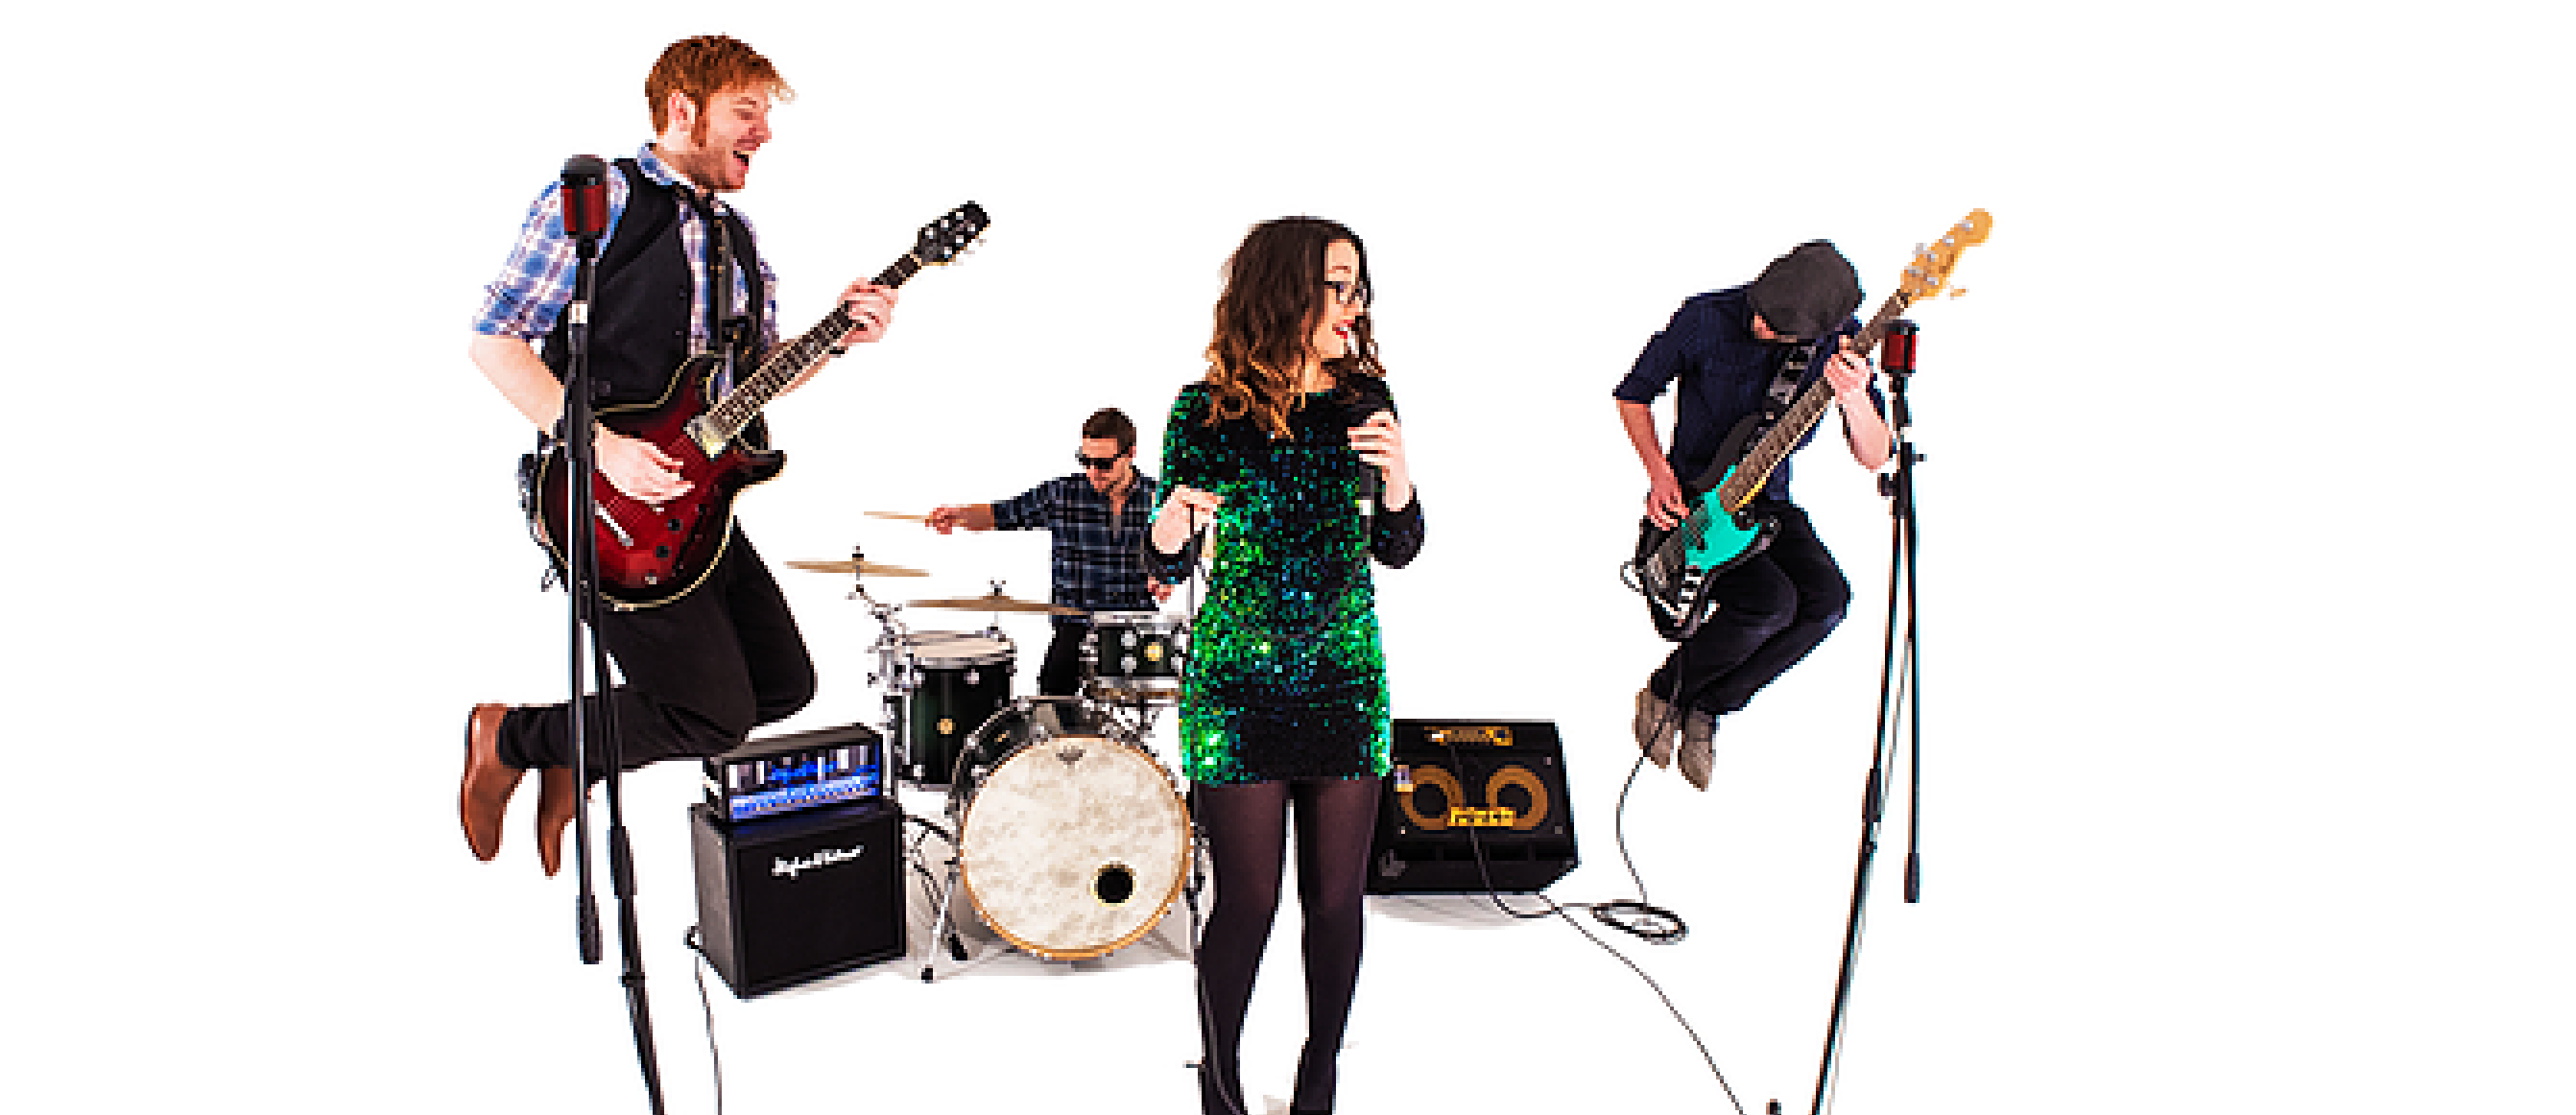 Manchester Bands for Hire | Cover Bands | Weddings | Events - Got Mojo?